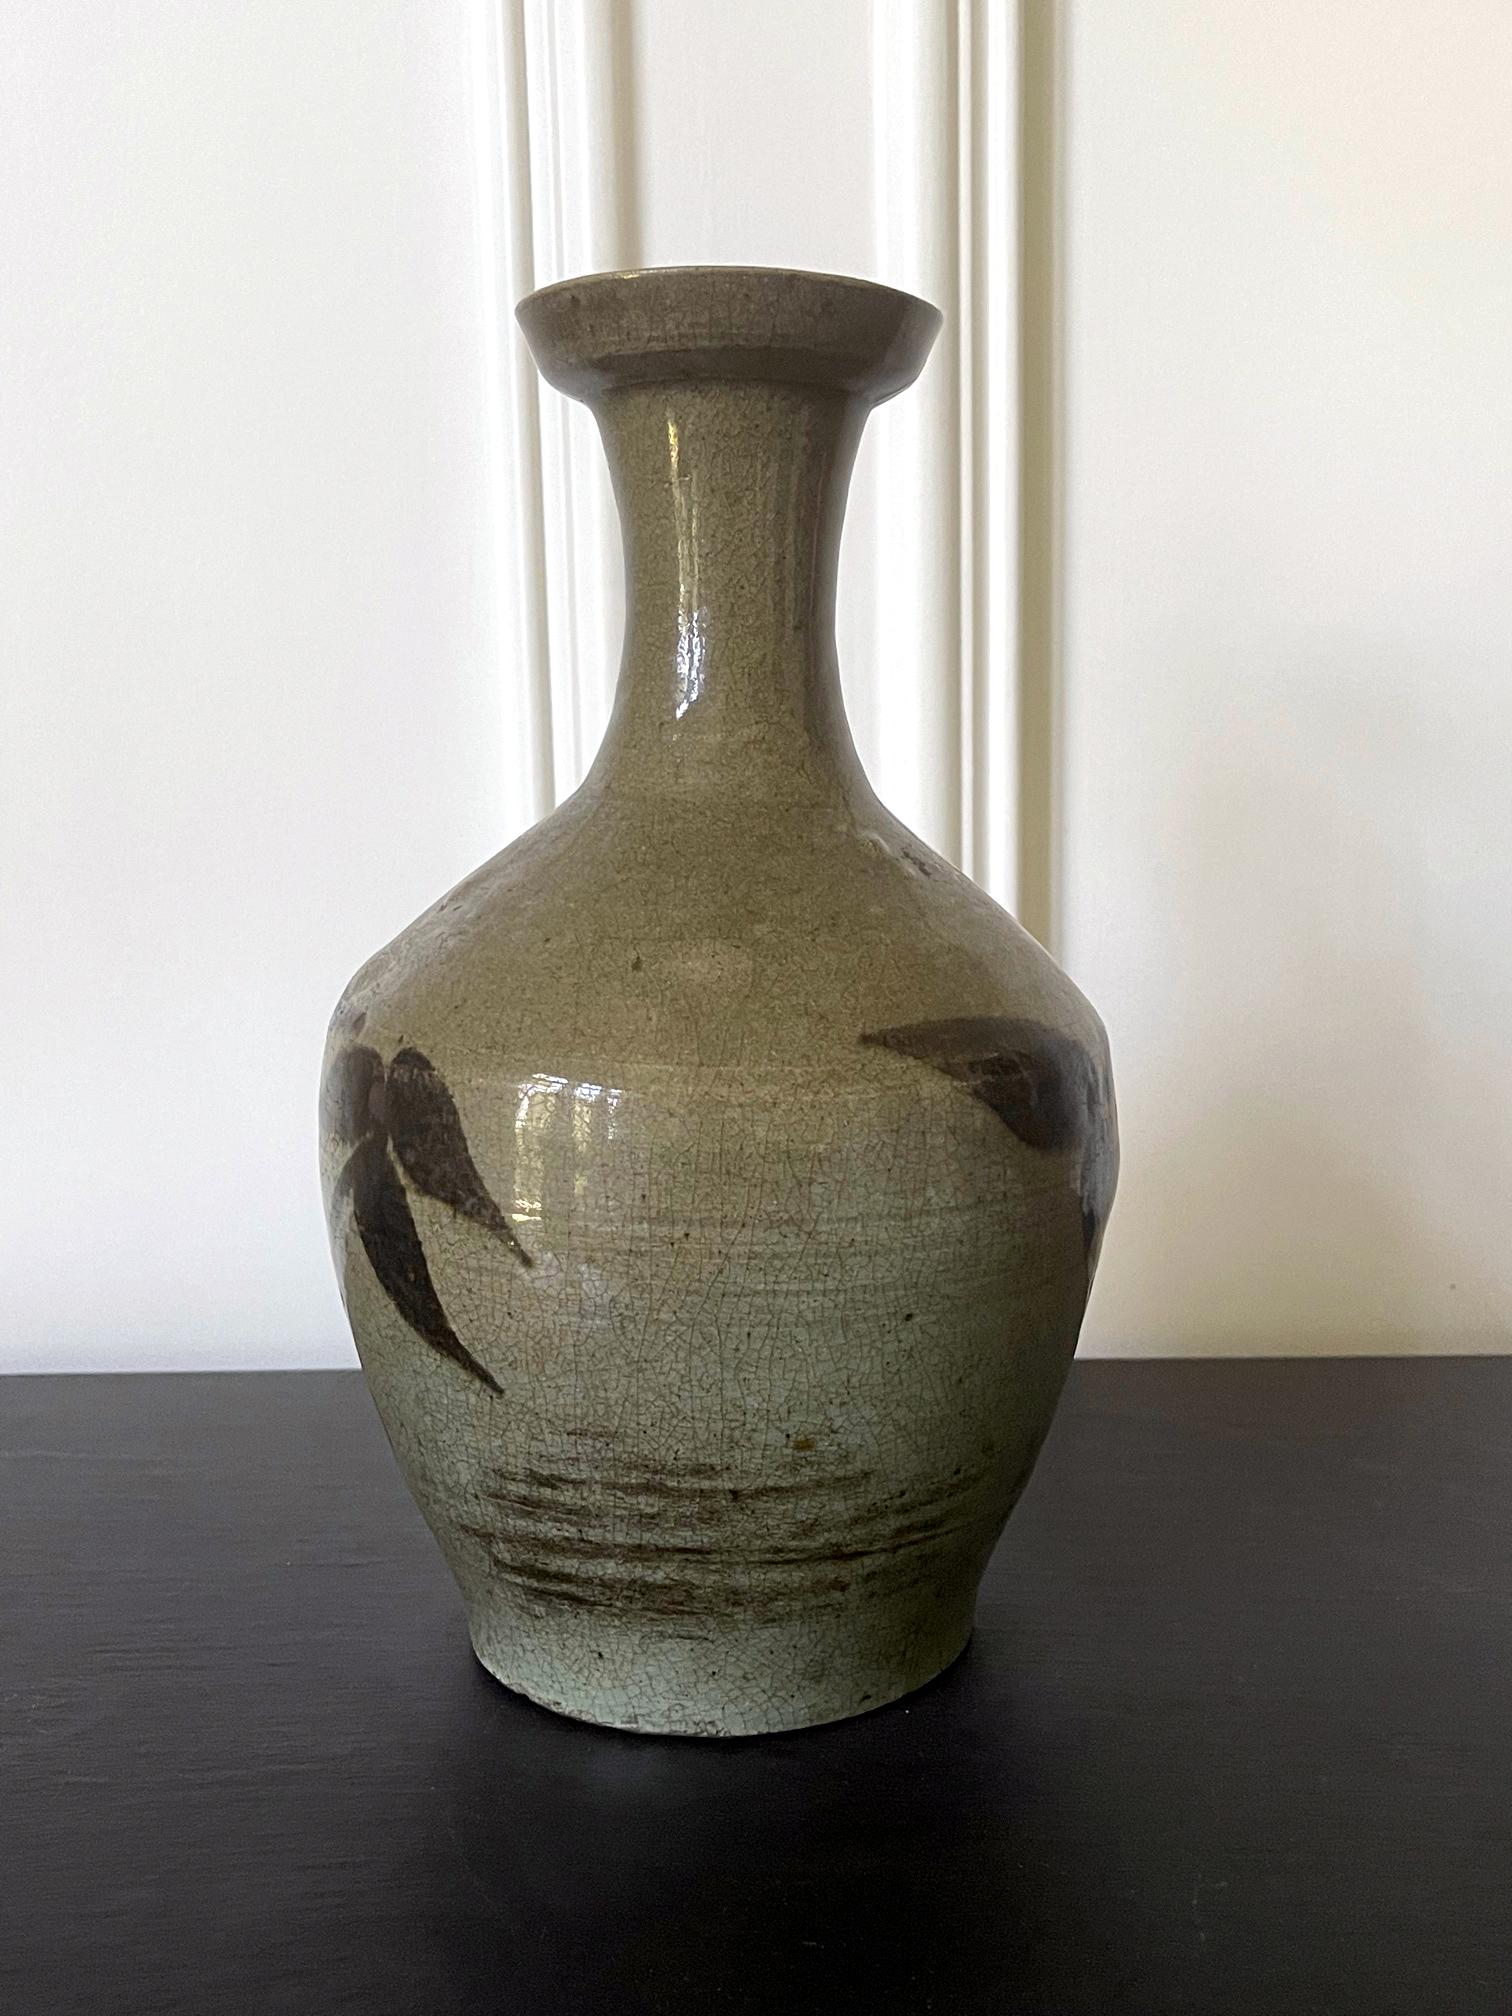 A wide-mouthed bottle form vase, known as Kwanggubyong, was a type of stoneware with celadon glaze, from Korea late Goryeo Dynasty circa 14-15th century. The untraditional shape and the decorative style and technique indicate that it was a